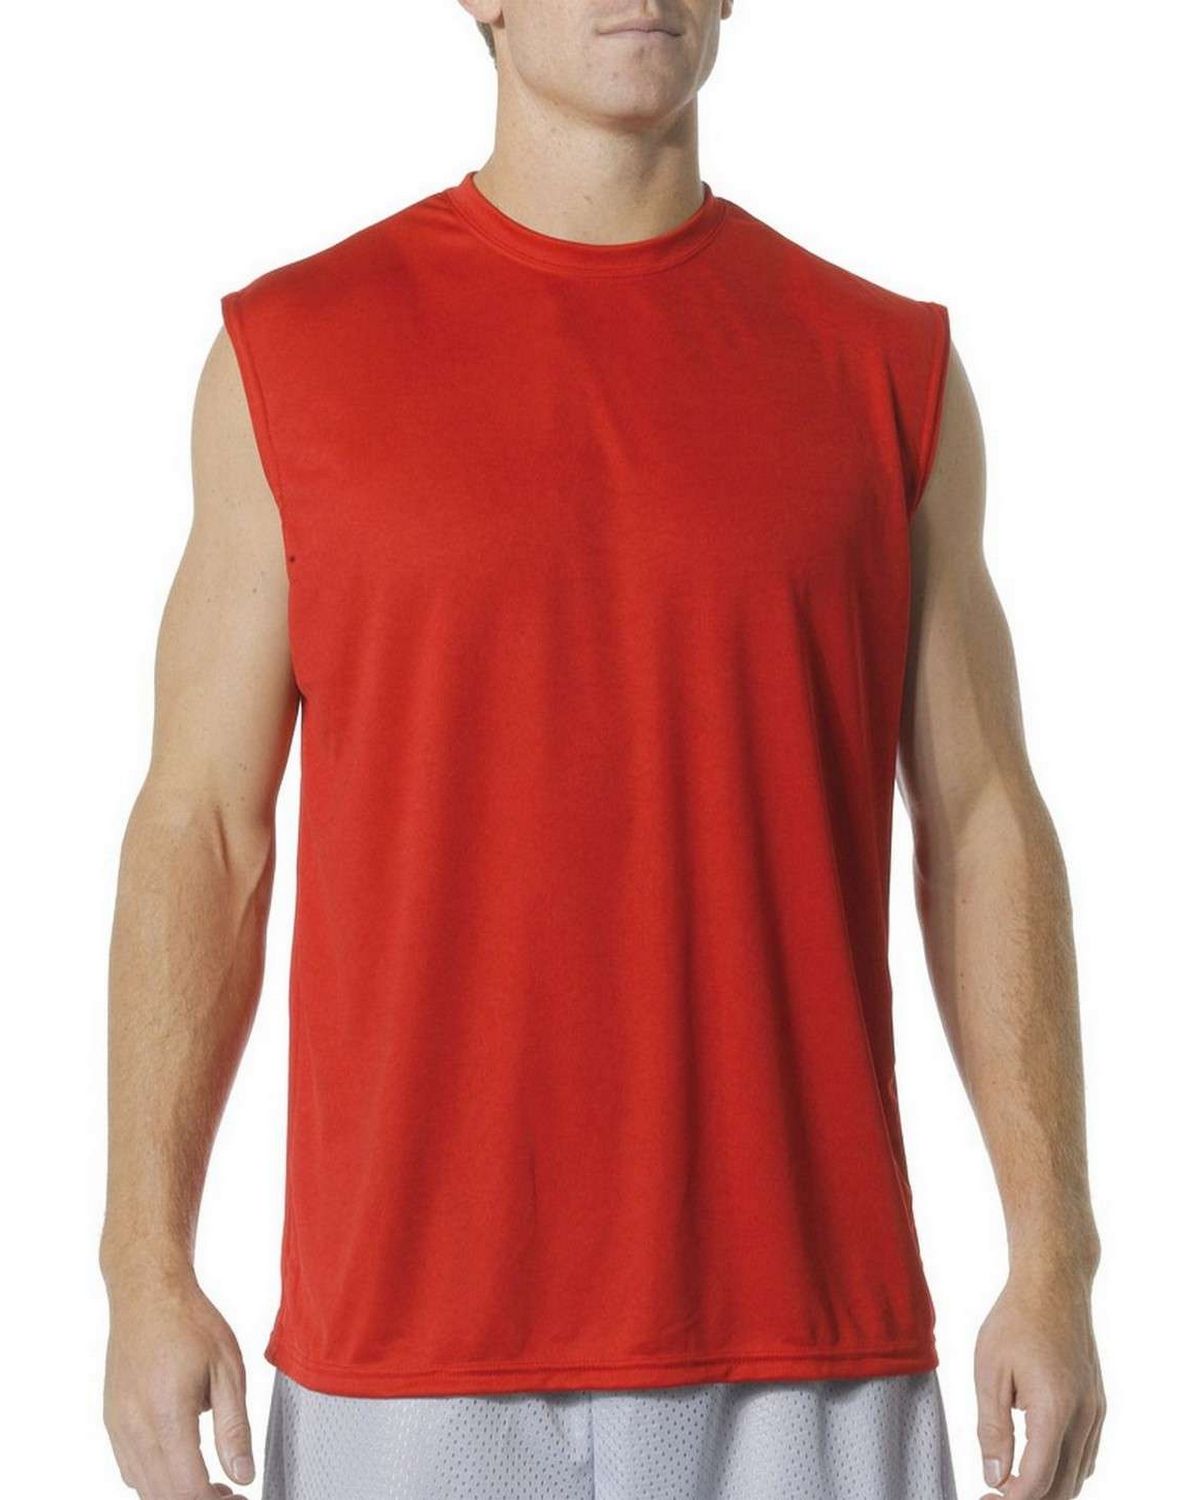 A4 N2295 Adult Cooling Performance Muscle Tee